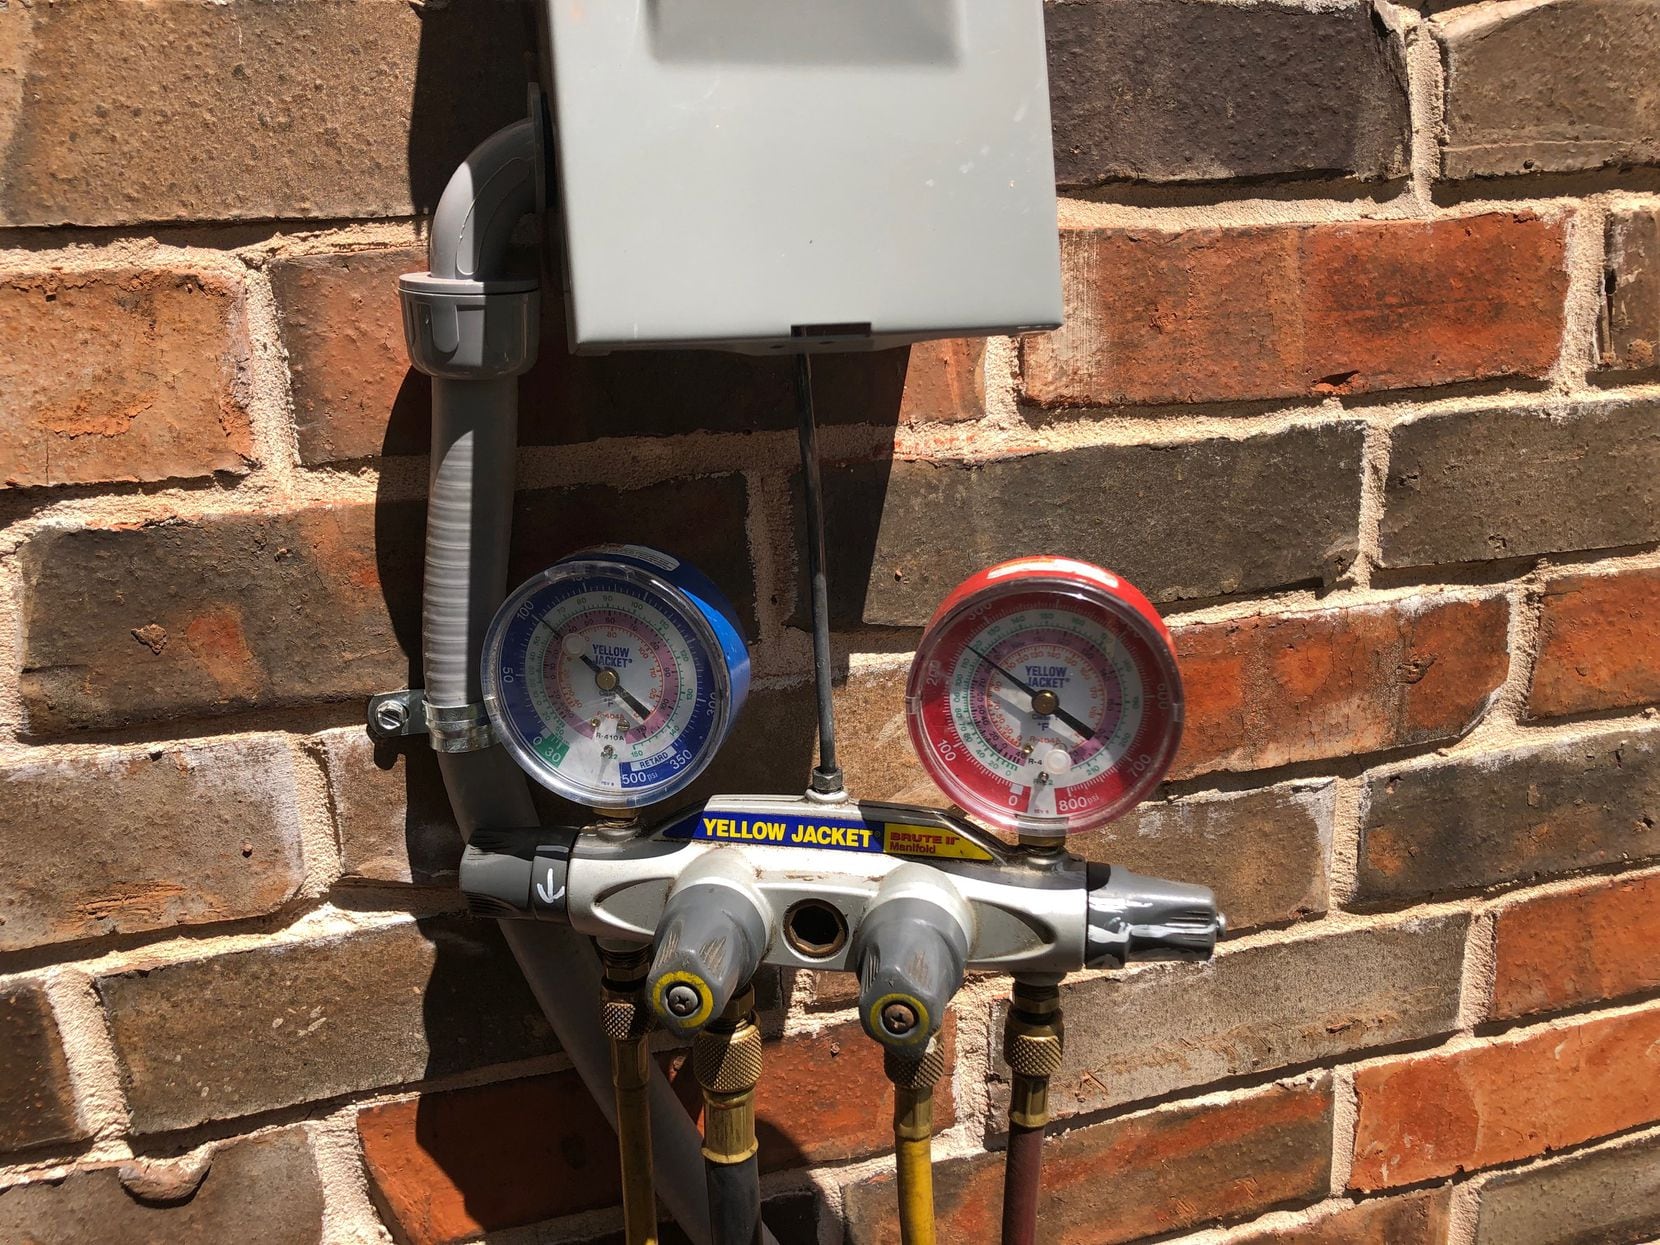 Watchdog Dave Lieber took this photo of the meter that measured the Freon leak at his house. It was 8 pounds 14; an environmental hazard and a tremendous waste of money to fill it up again.